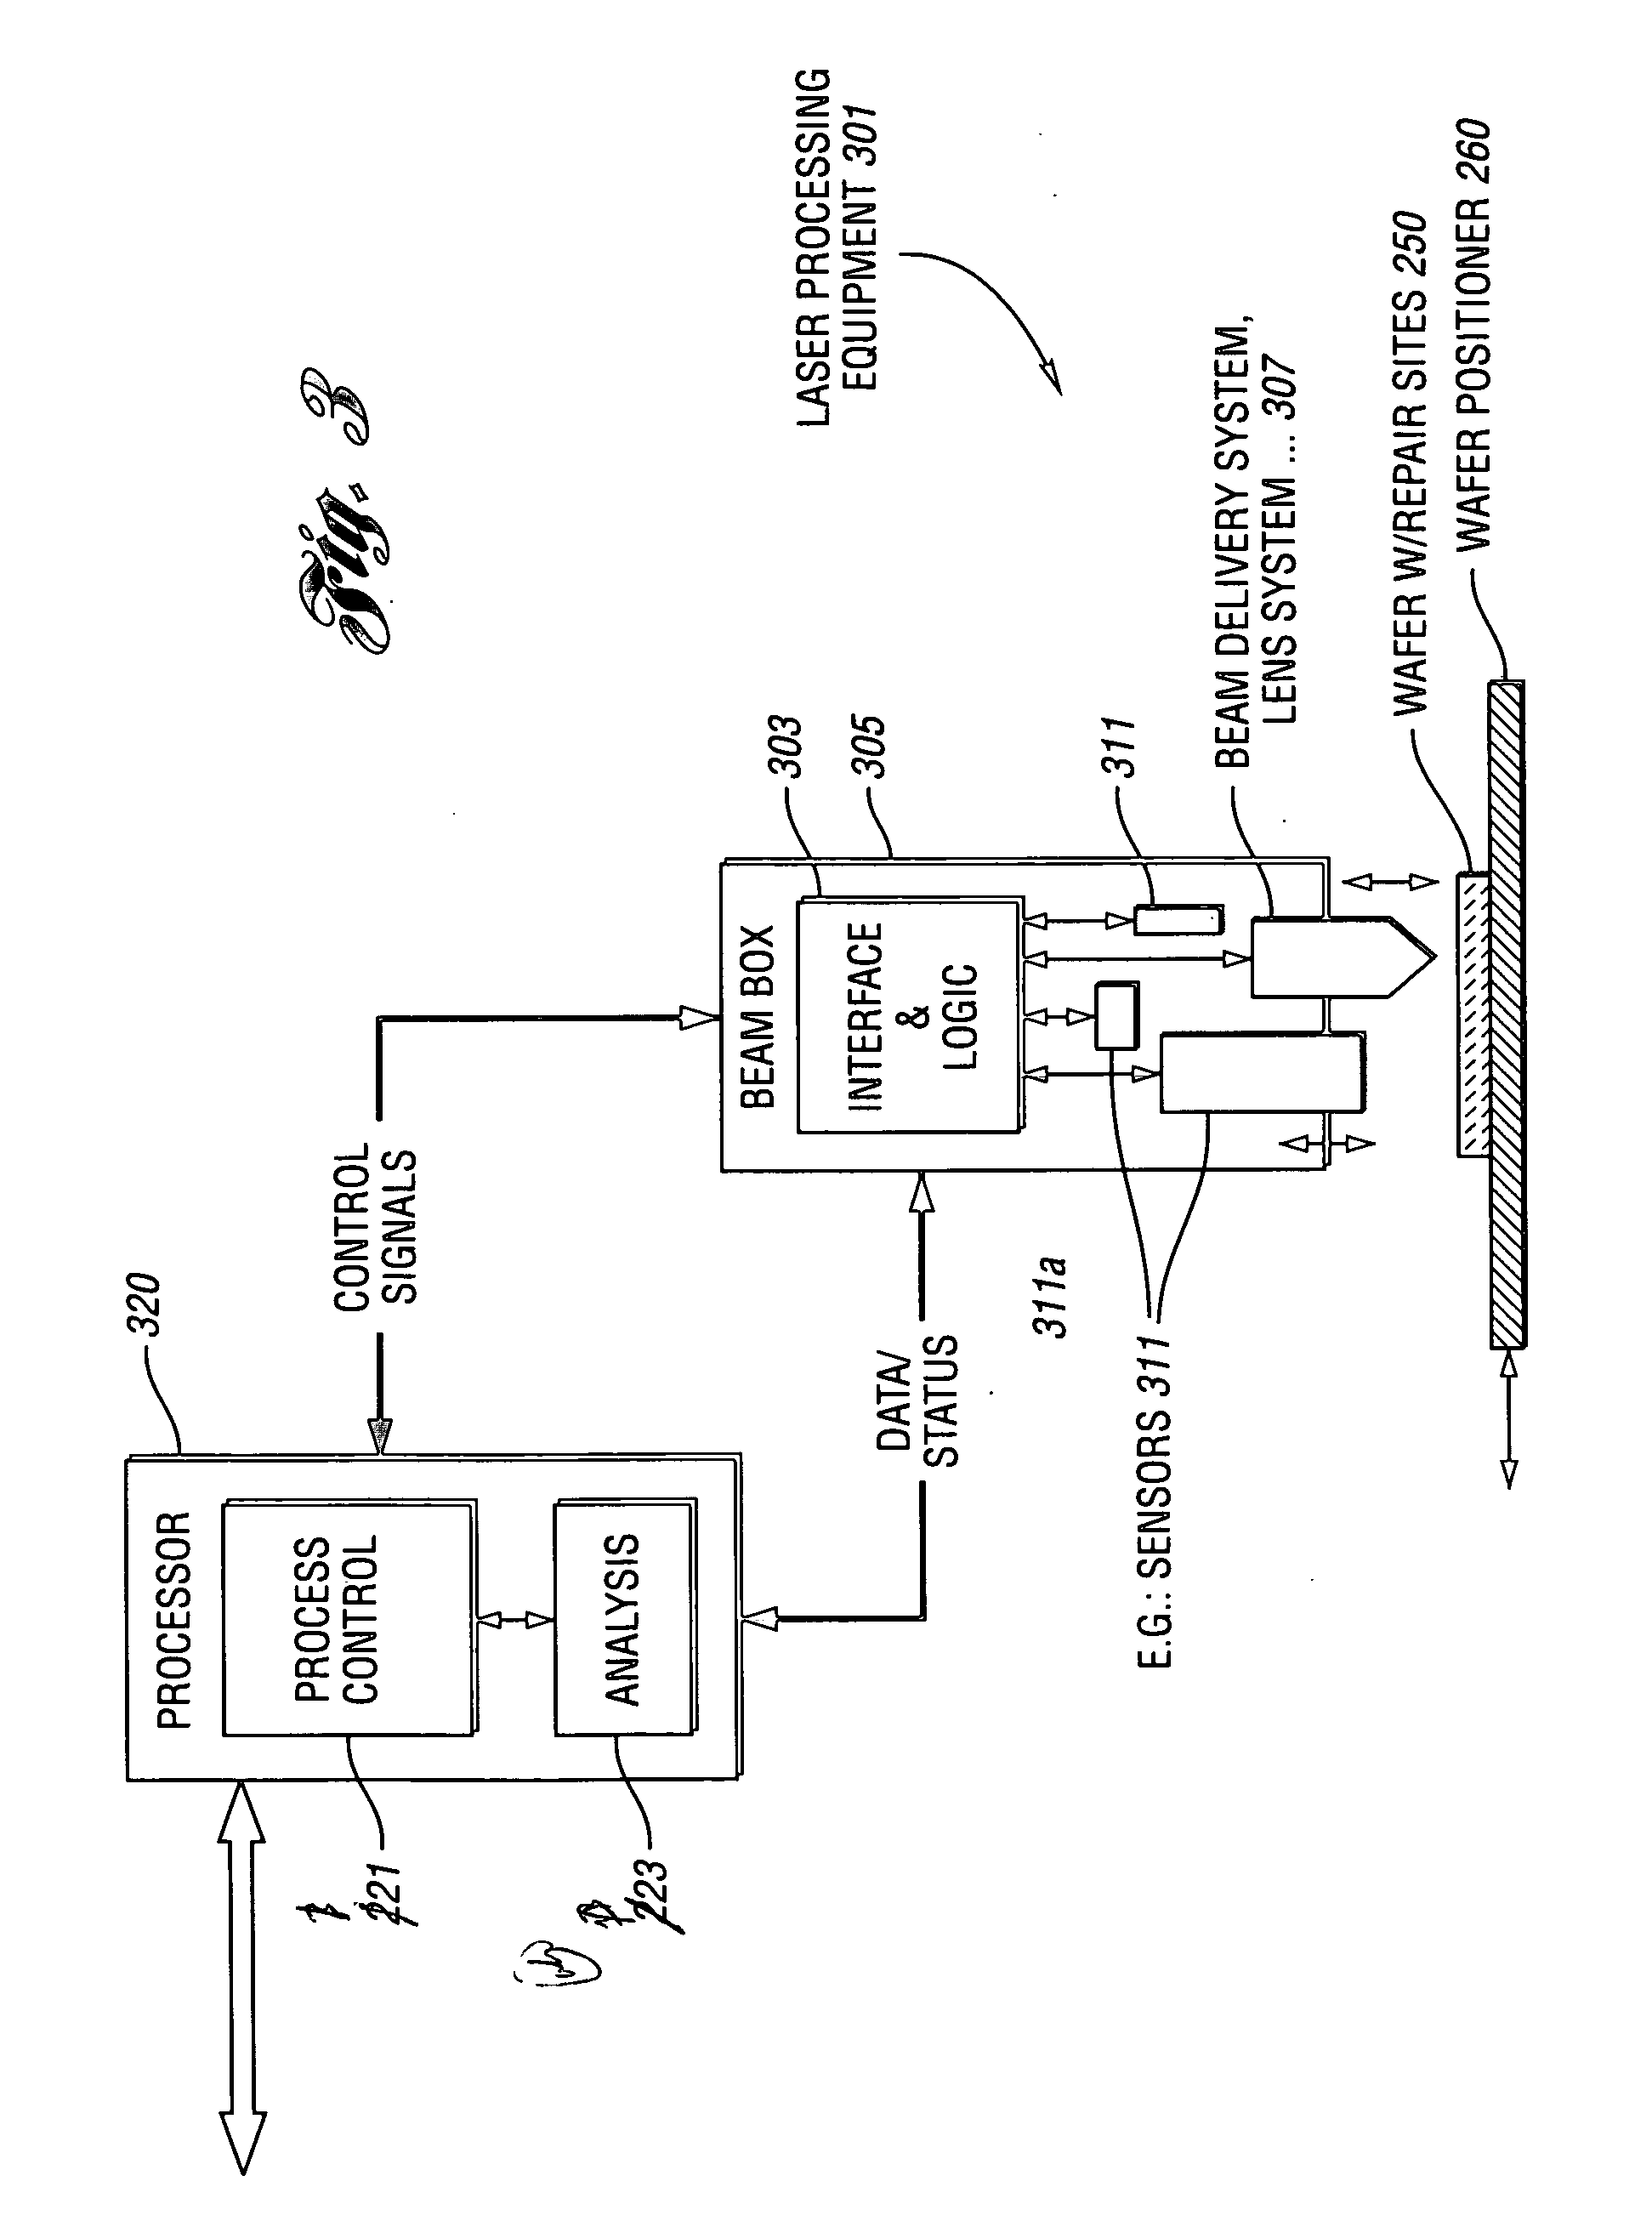 Method and system for adaptively controlling a laser-based material processing process and method and system for qualifying same